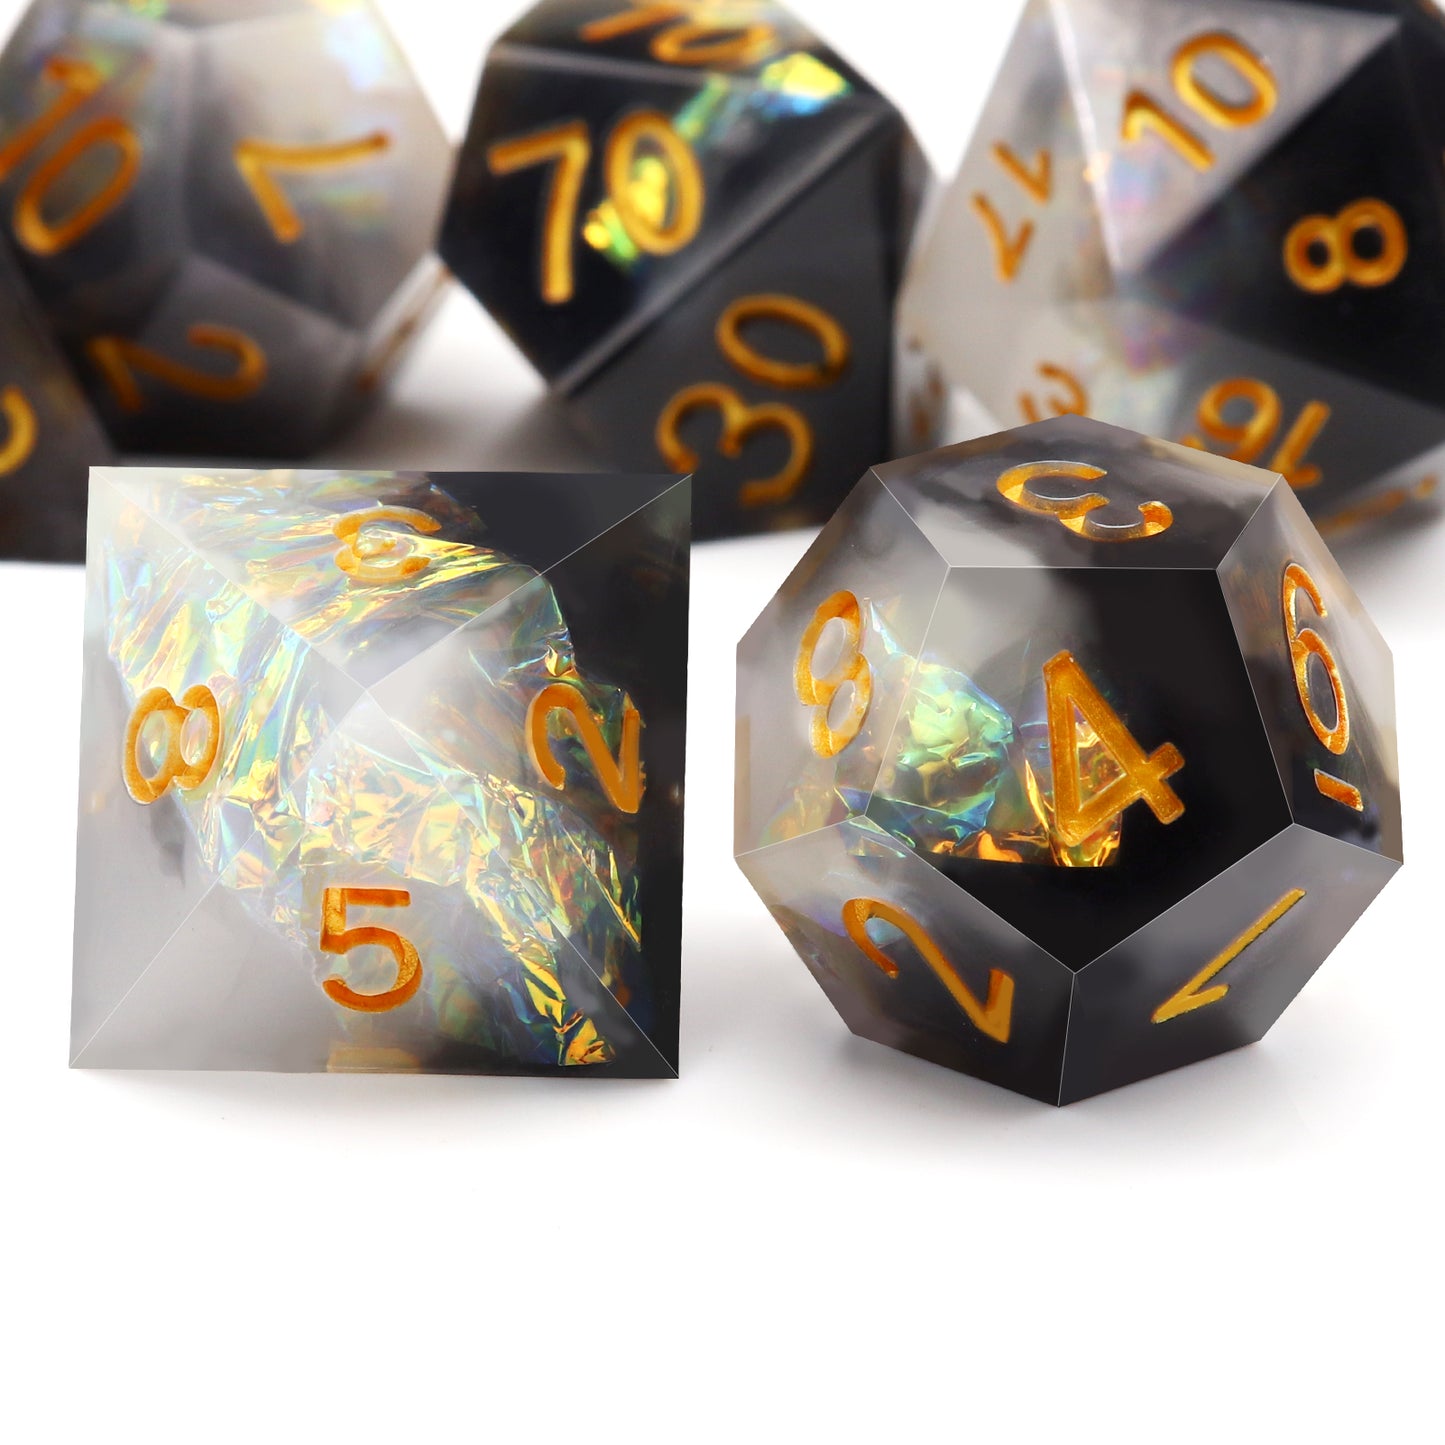 Haxtec Sharp Edge Dice Set DND Dice Black and White Resin Dice Iridecent Mylar Galaxy D&D Dice for RPG Role Playing Dungeons and Dragons Gift